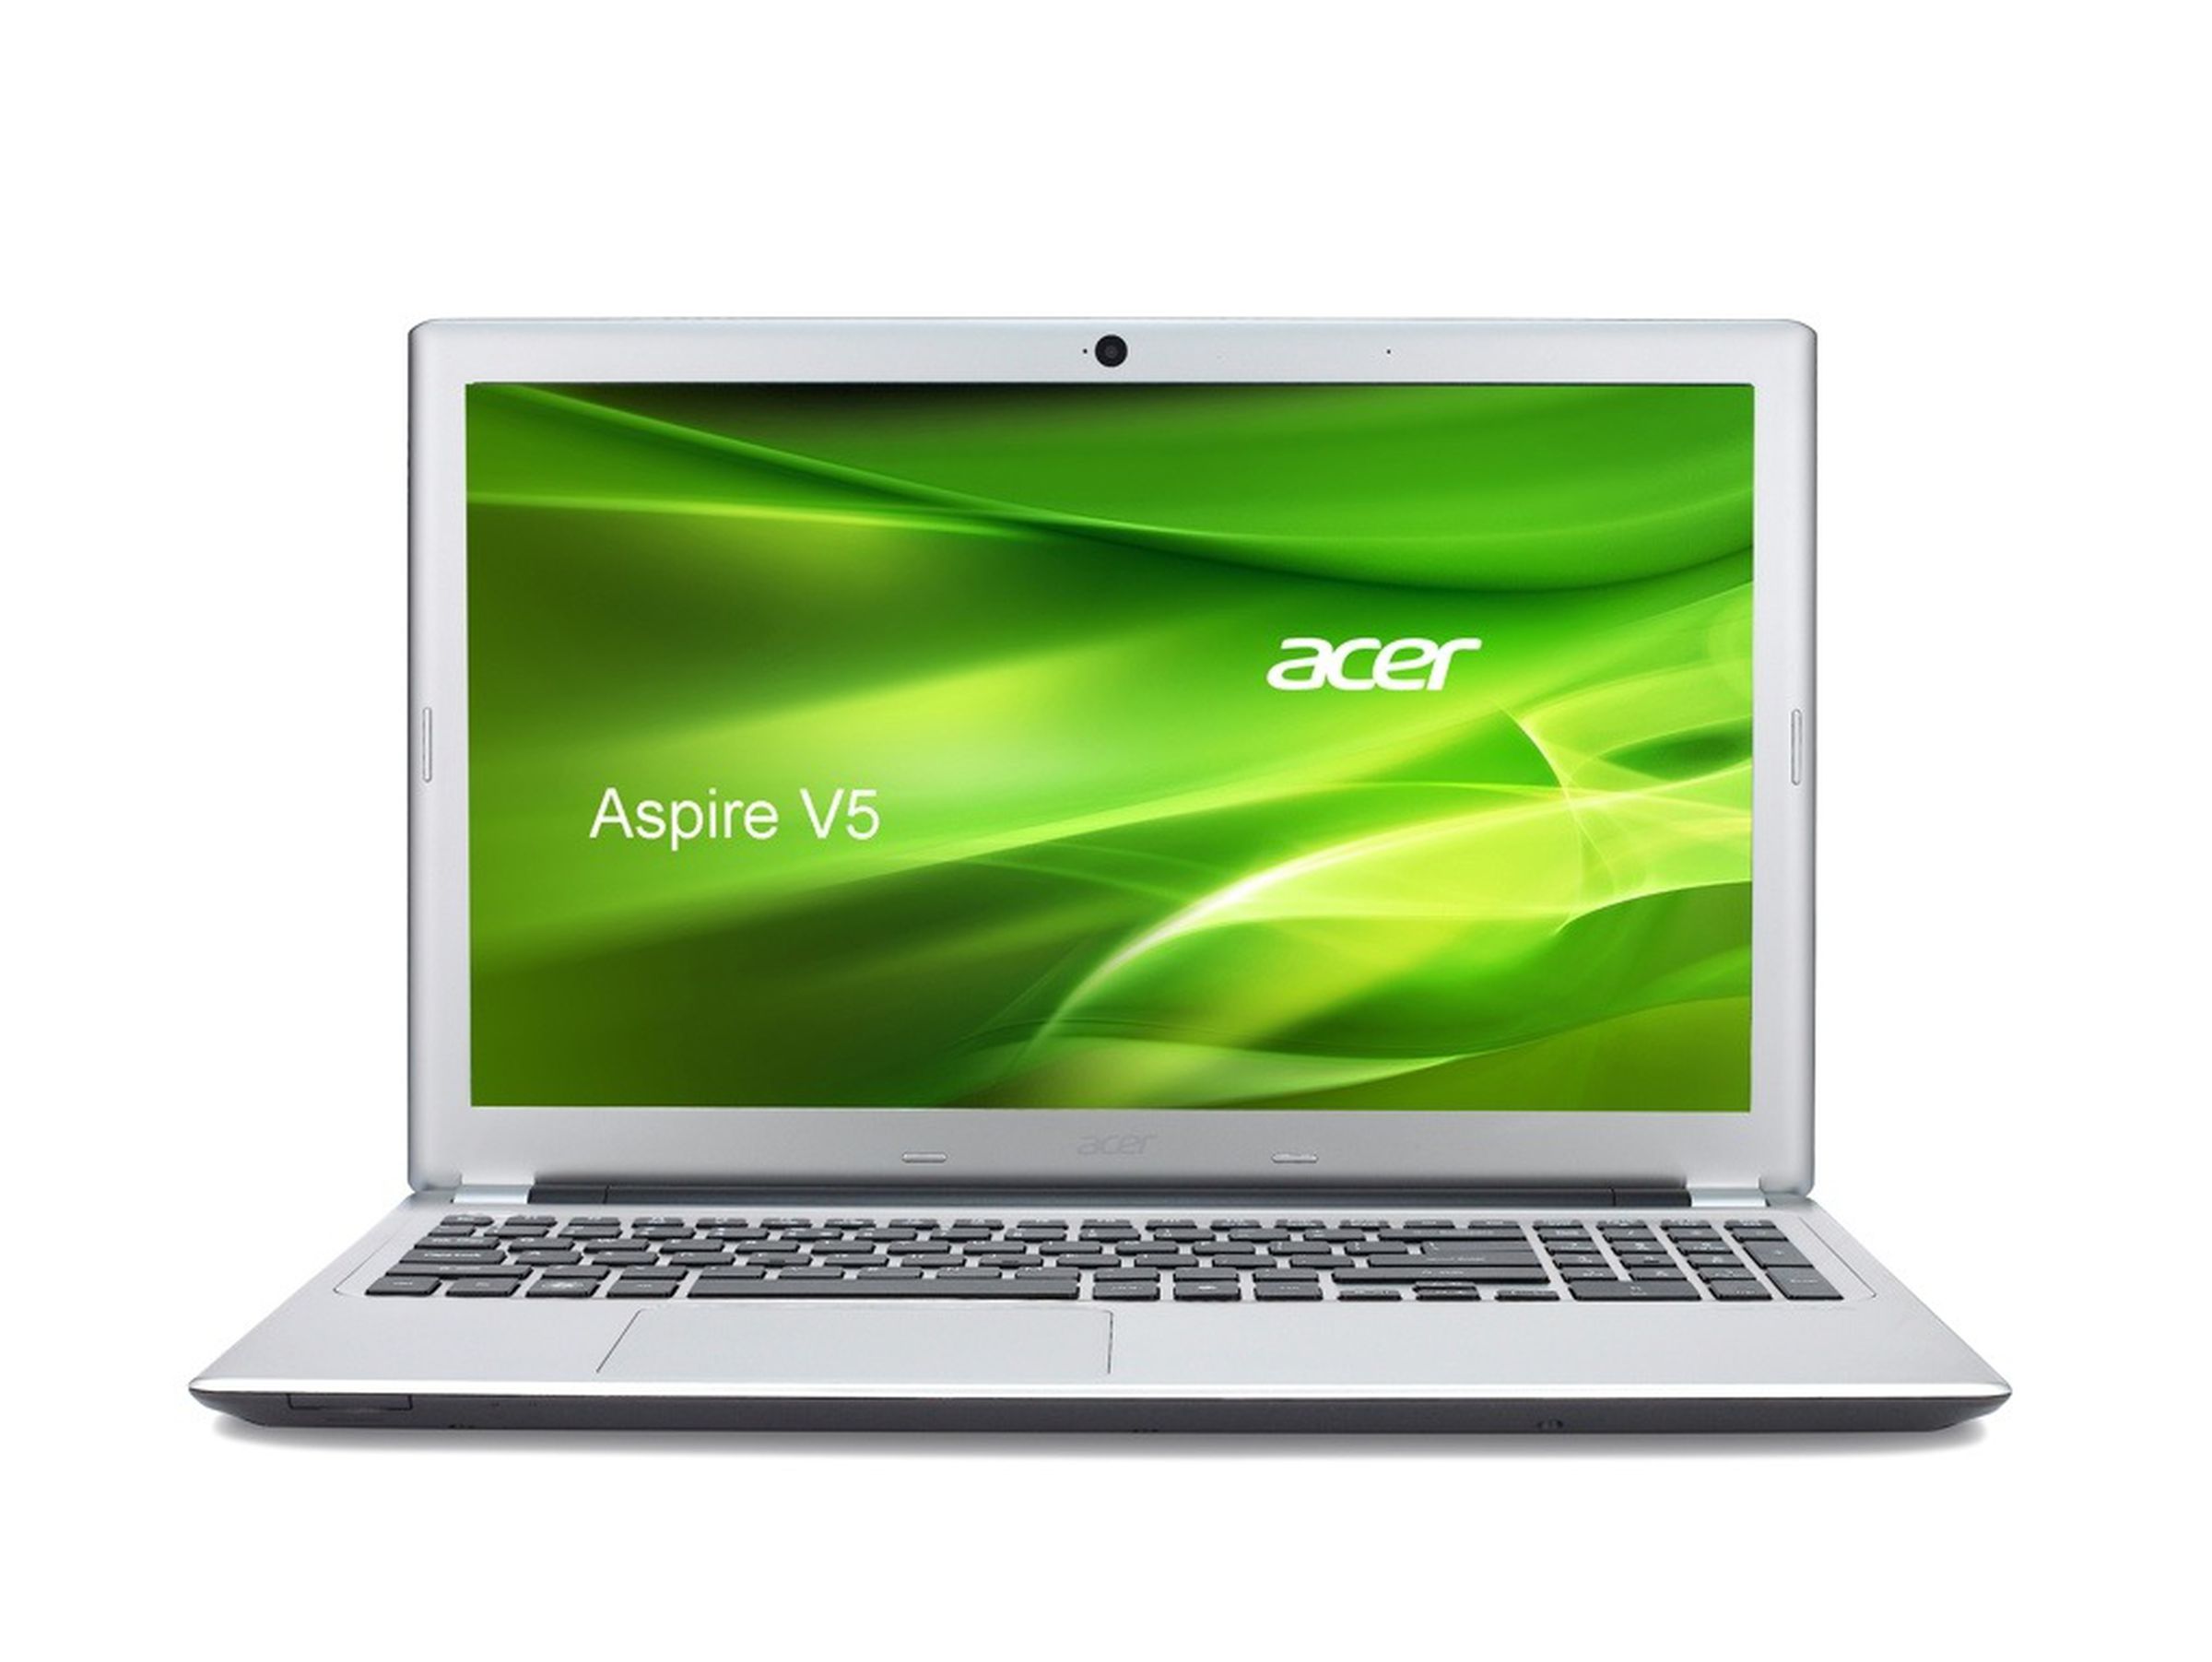 Acer Aspire V5 touch press pictures